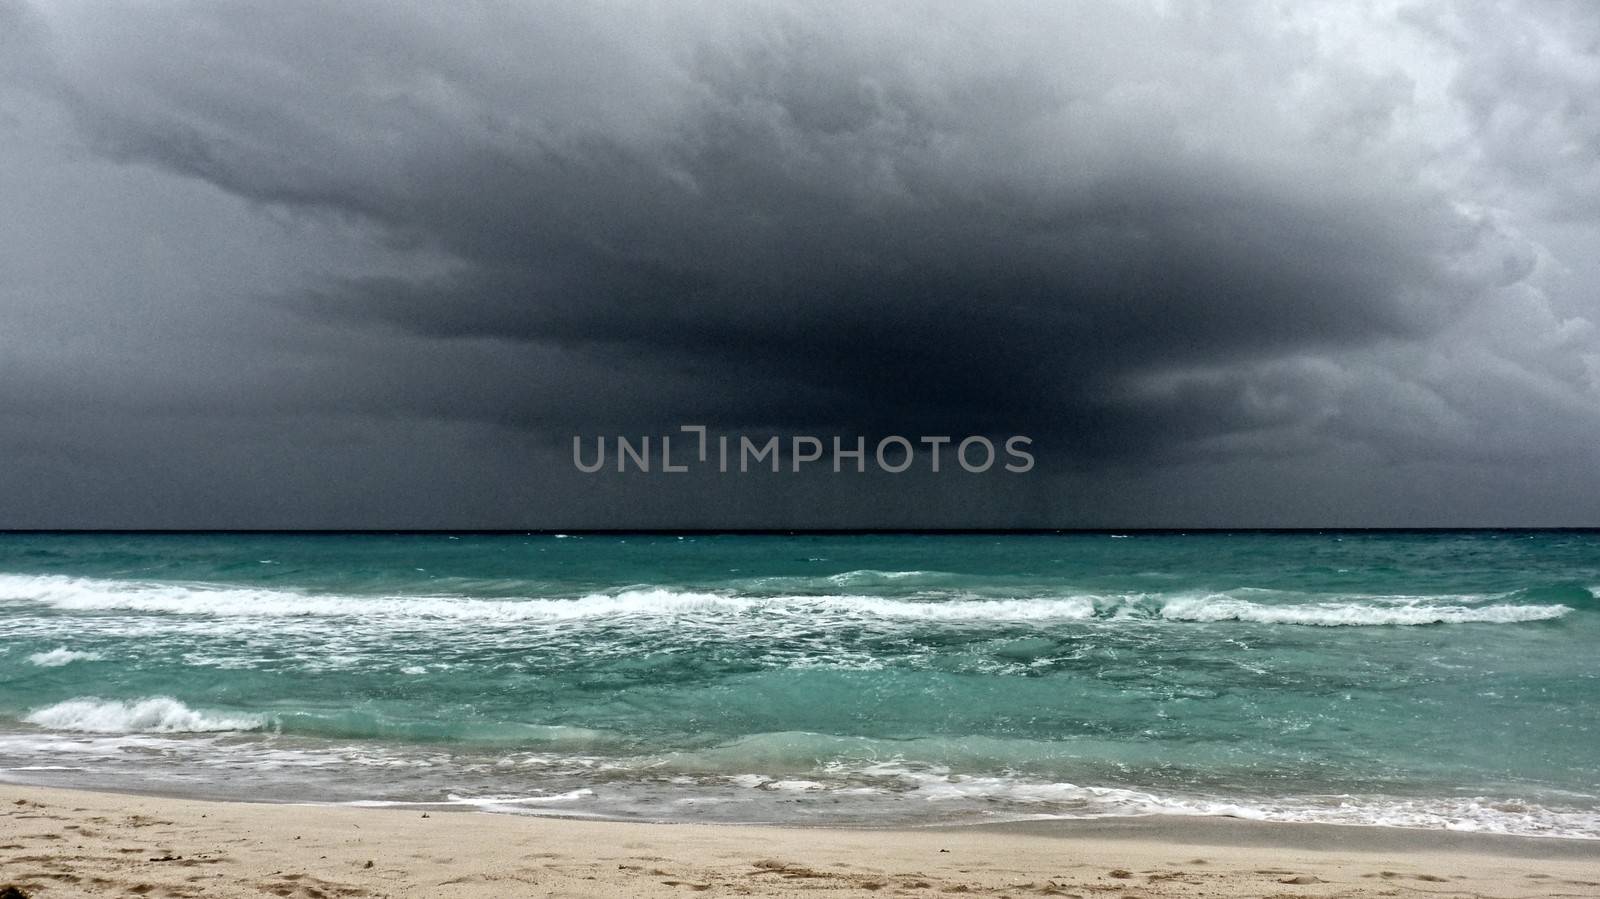 View of a storm on the ocean by nicousnake